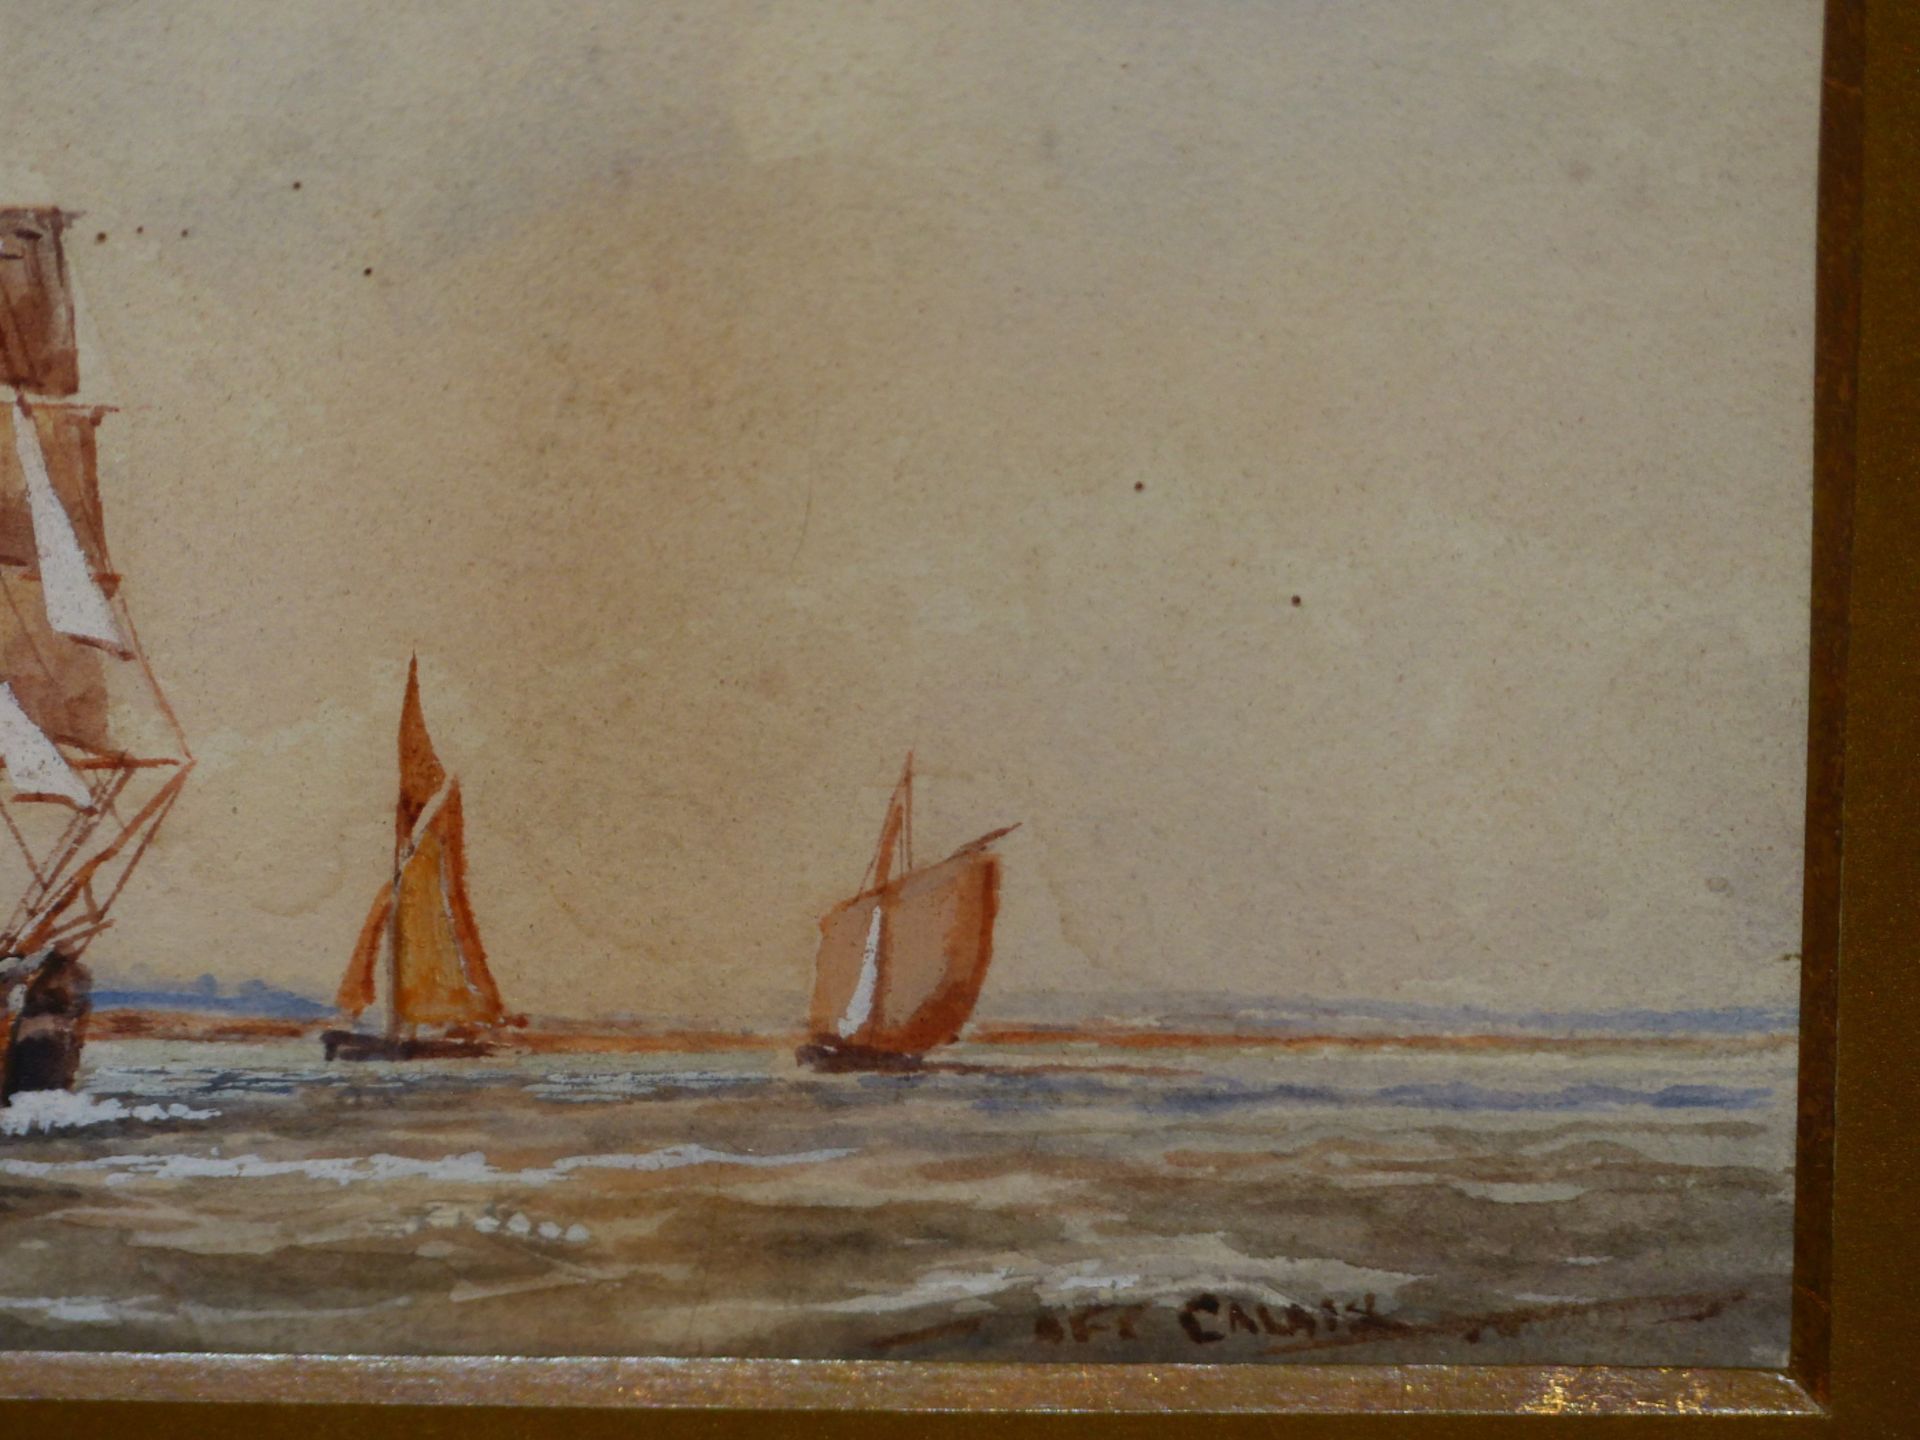 19TH CENTURY SCHOOL. SHIIPPING SCENE. OFF CALAIS, WATERCOLOUR. TITLED L/R. 26 X 9 cm. - Image 5 of 7